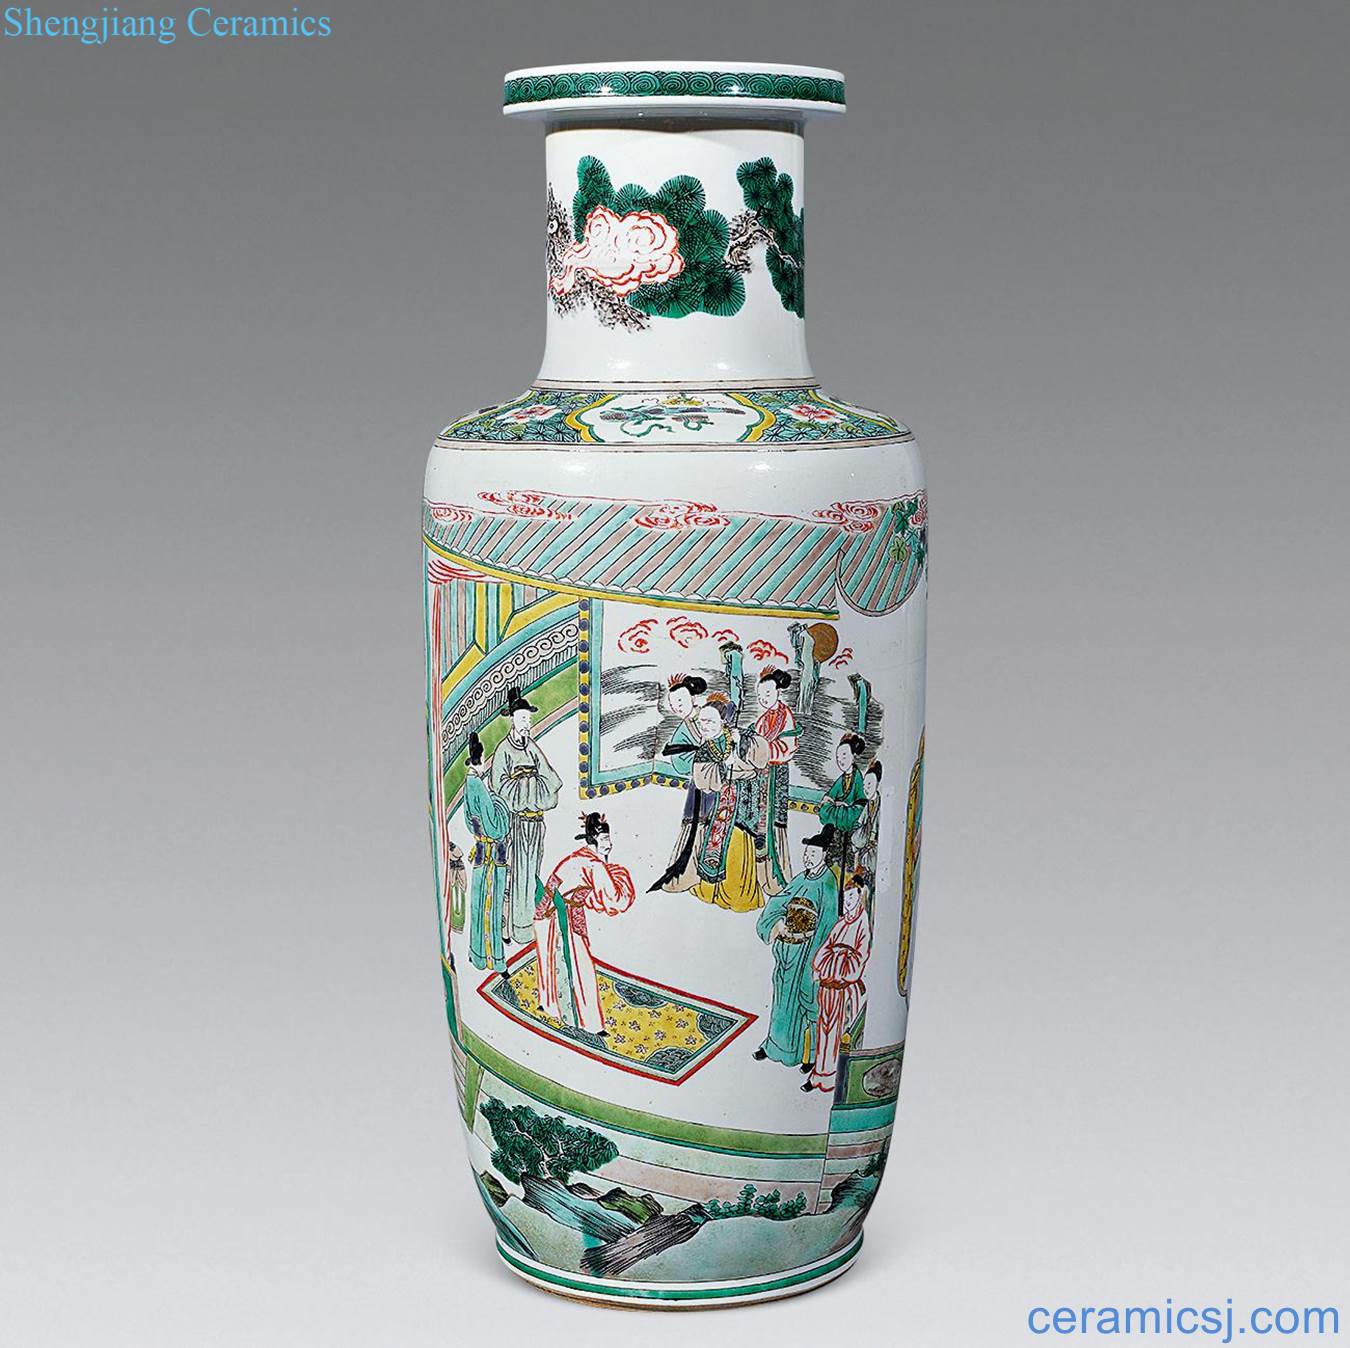 The qing emperor kangxi stories were bottles of colorful characters